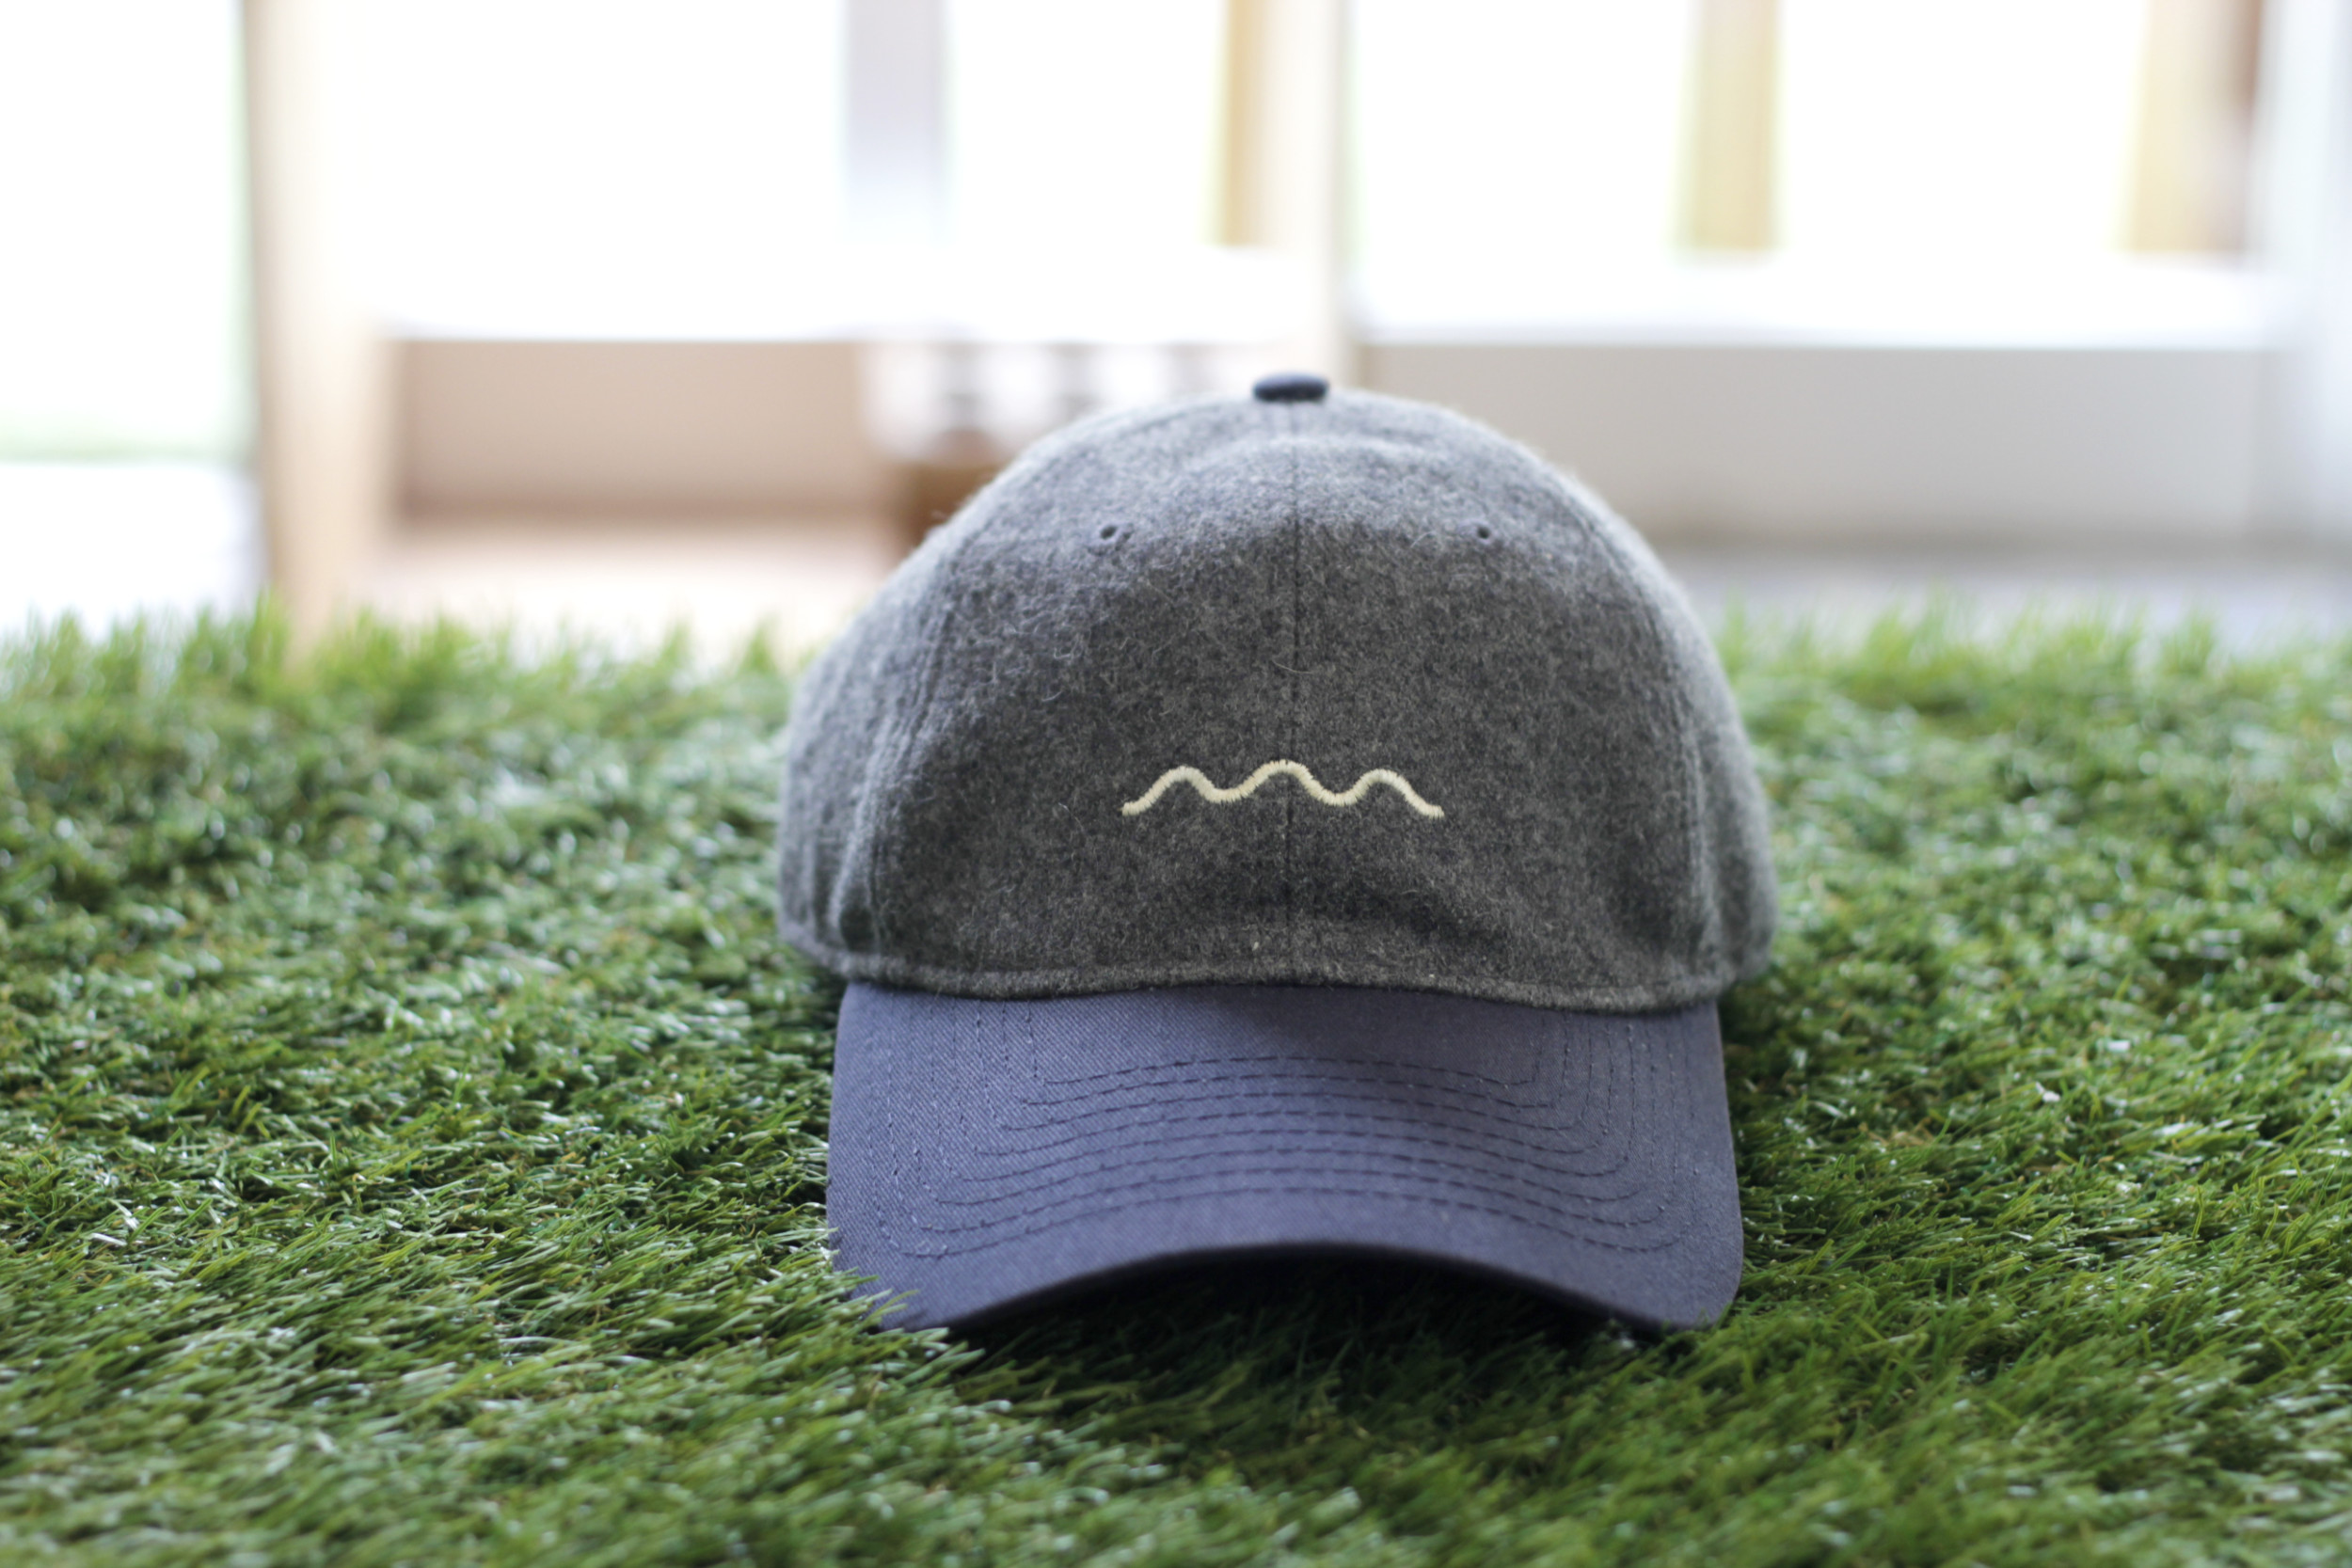 THE GOOD COMPANY × New Era / Chill Weave Wool Cap | NICE des